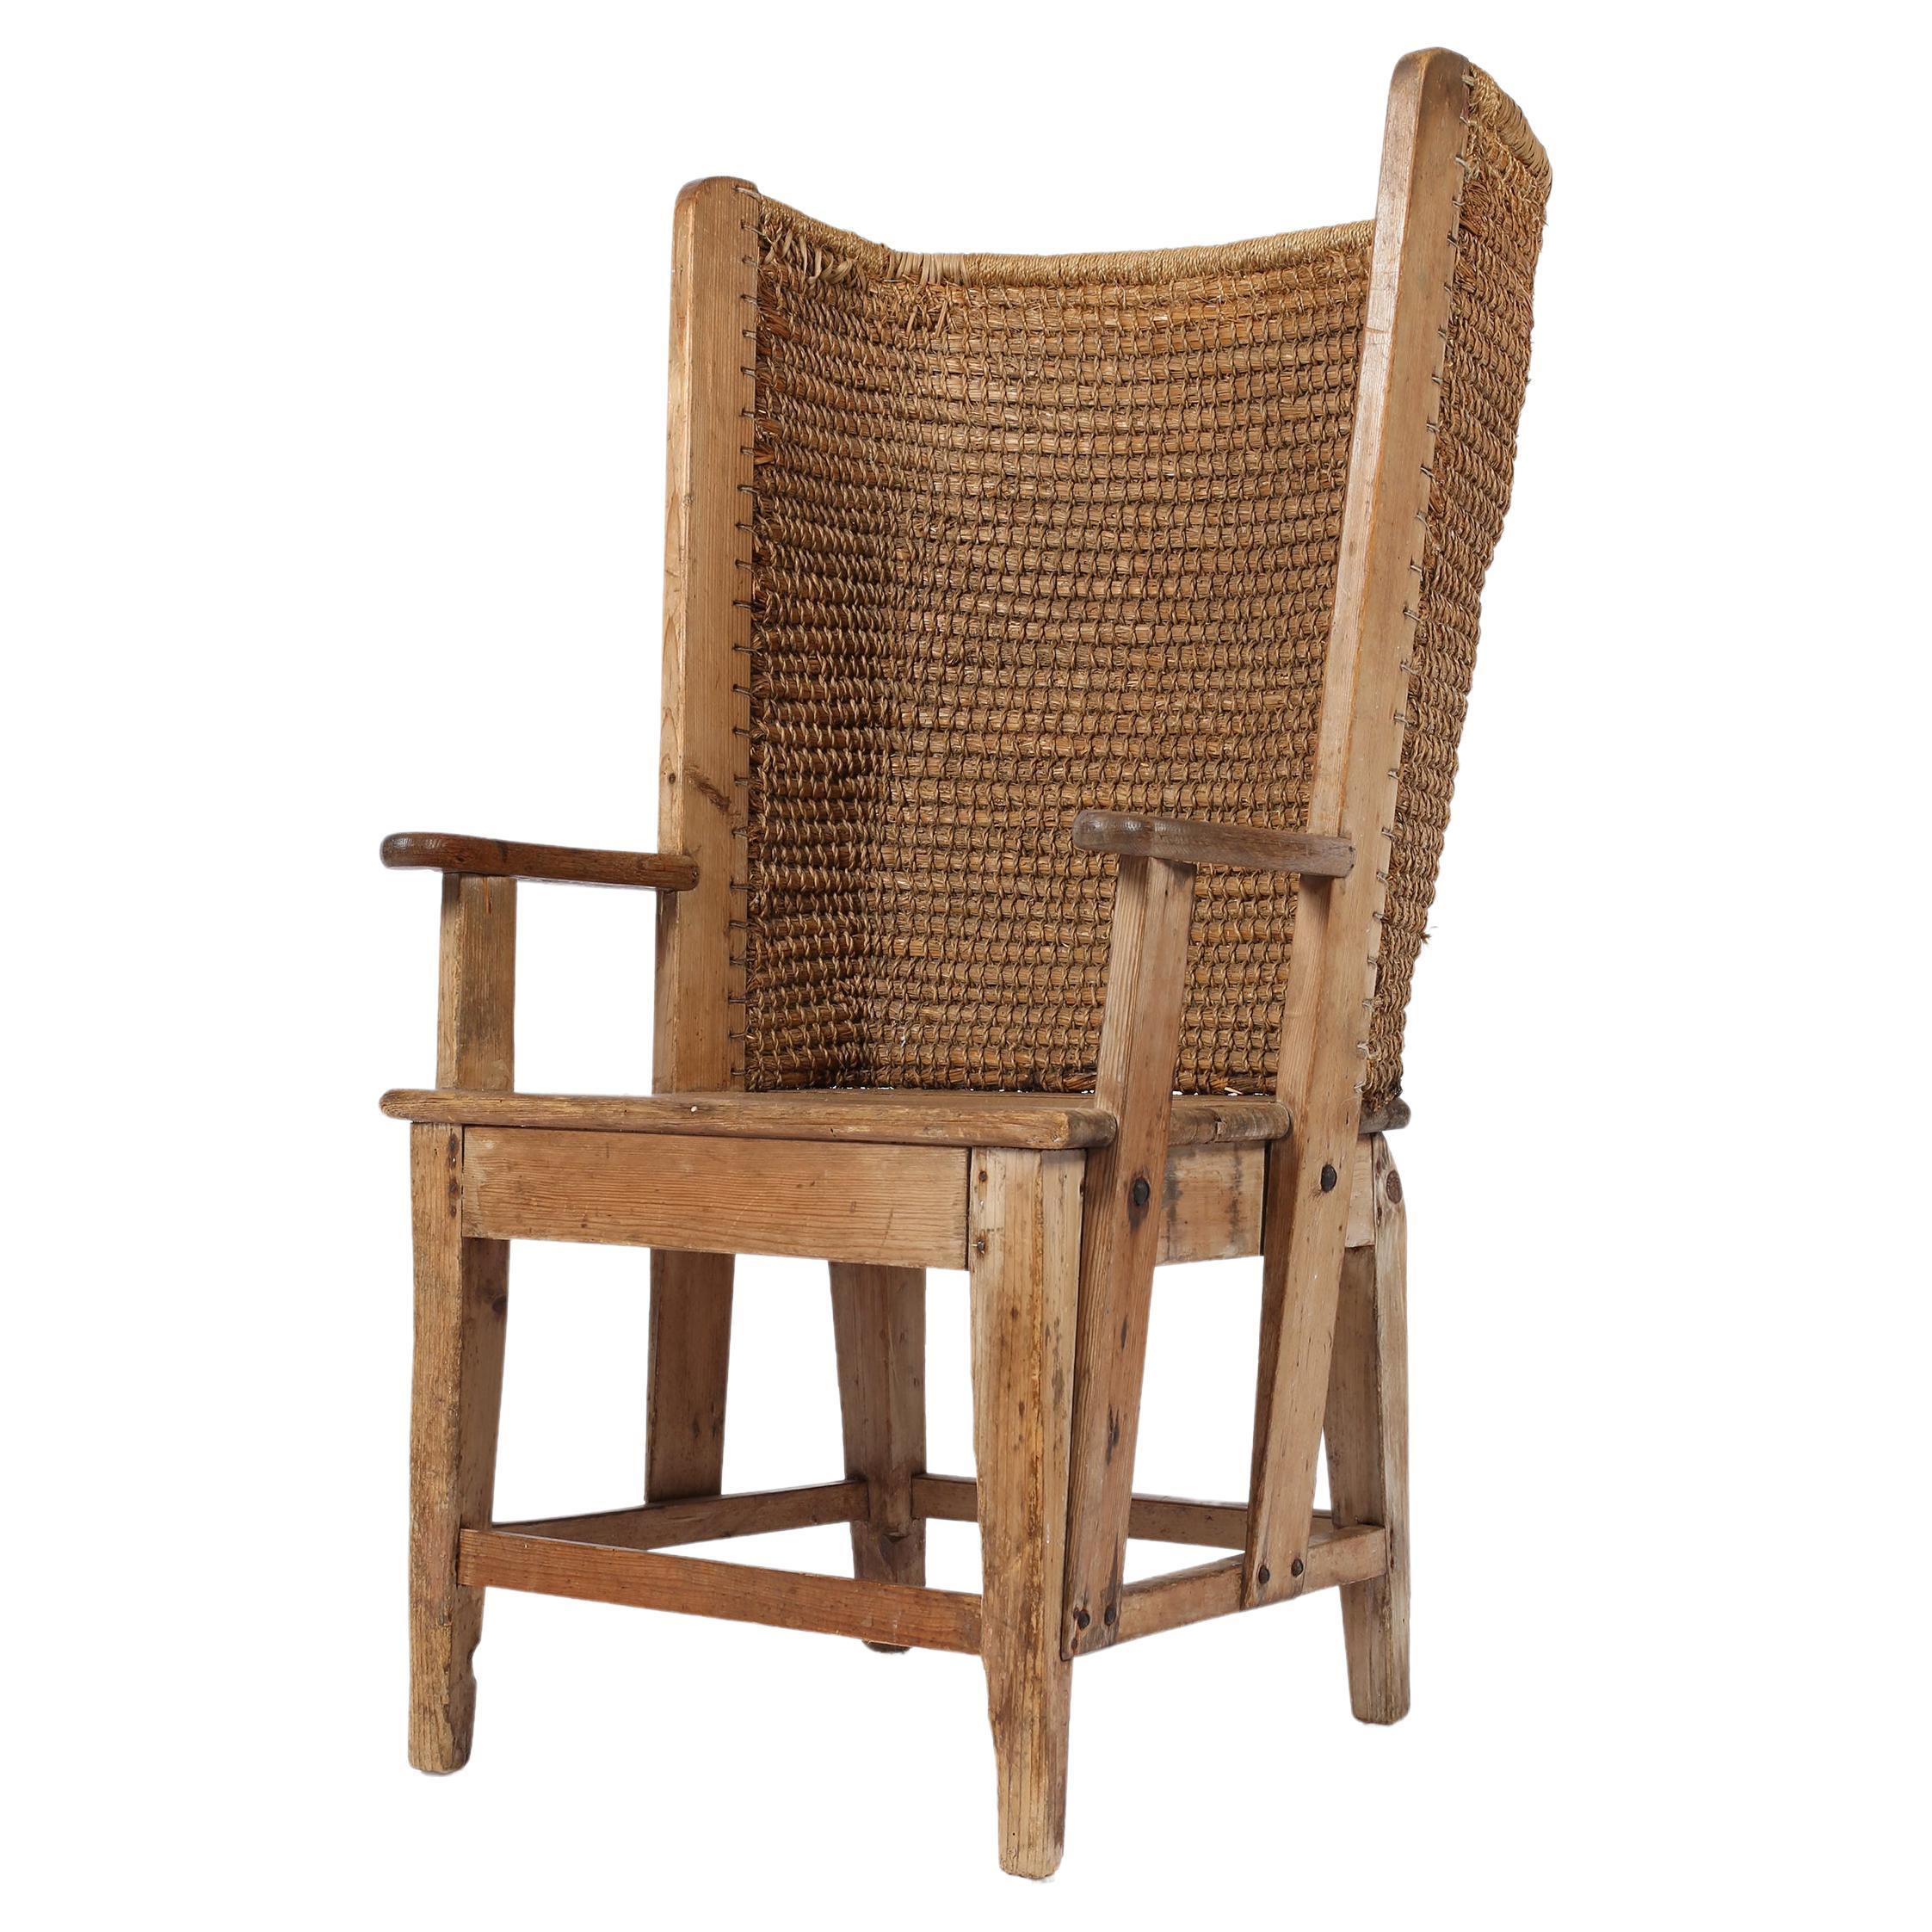 Late 19th Century Scottish Vernacular Pine and Woven Straw Orkney Chair